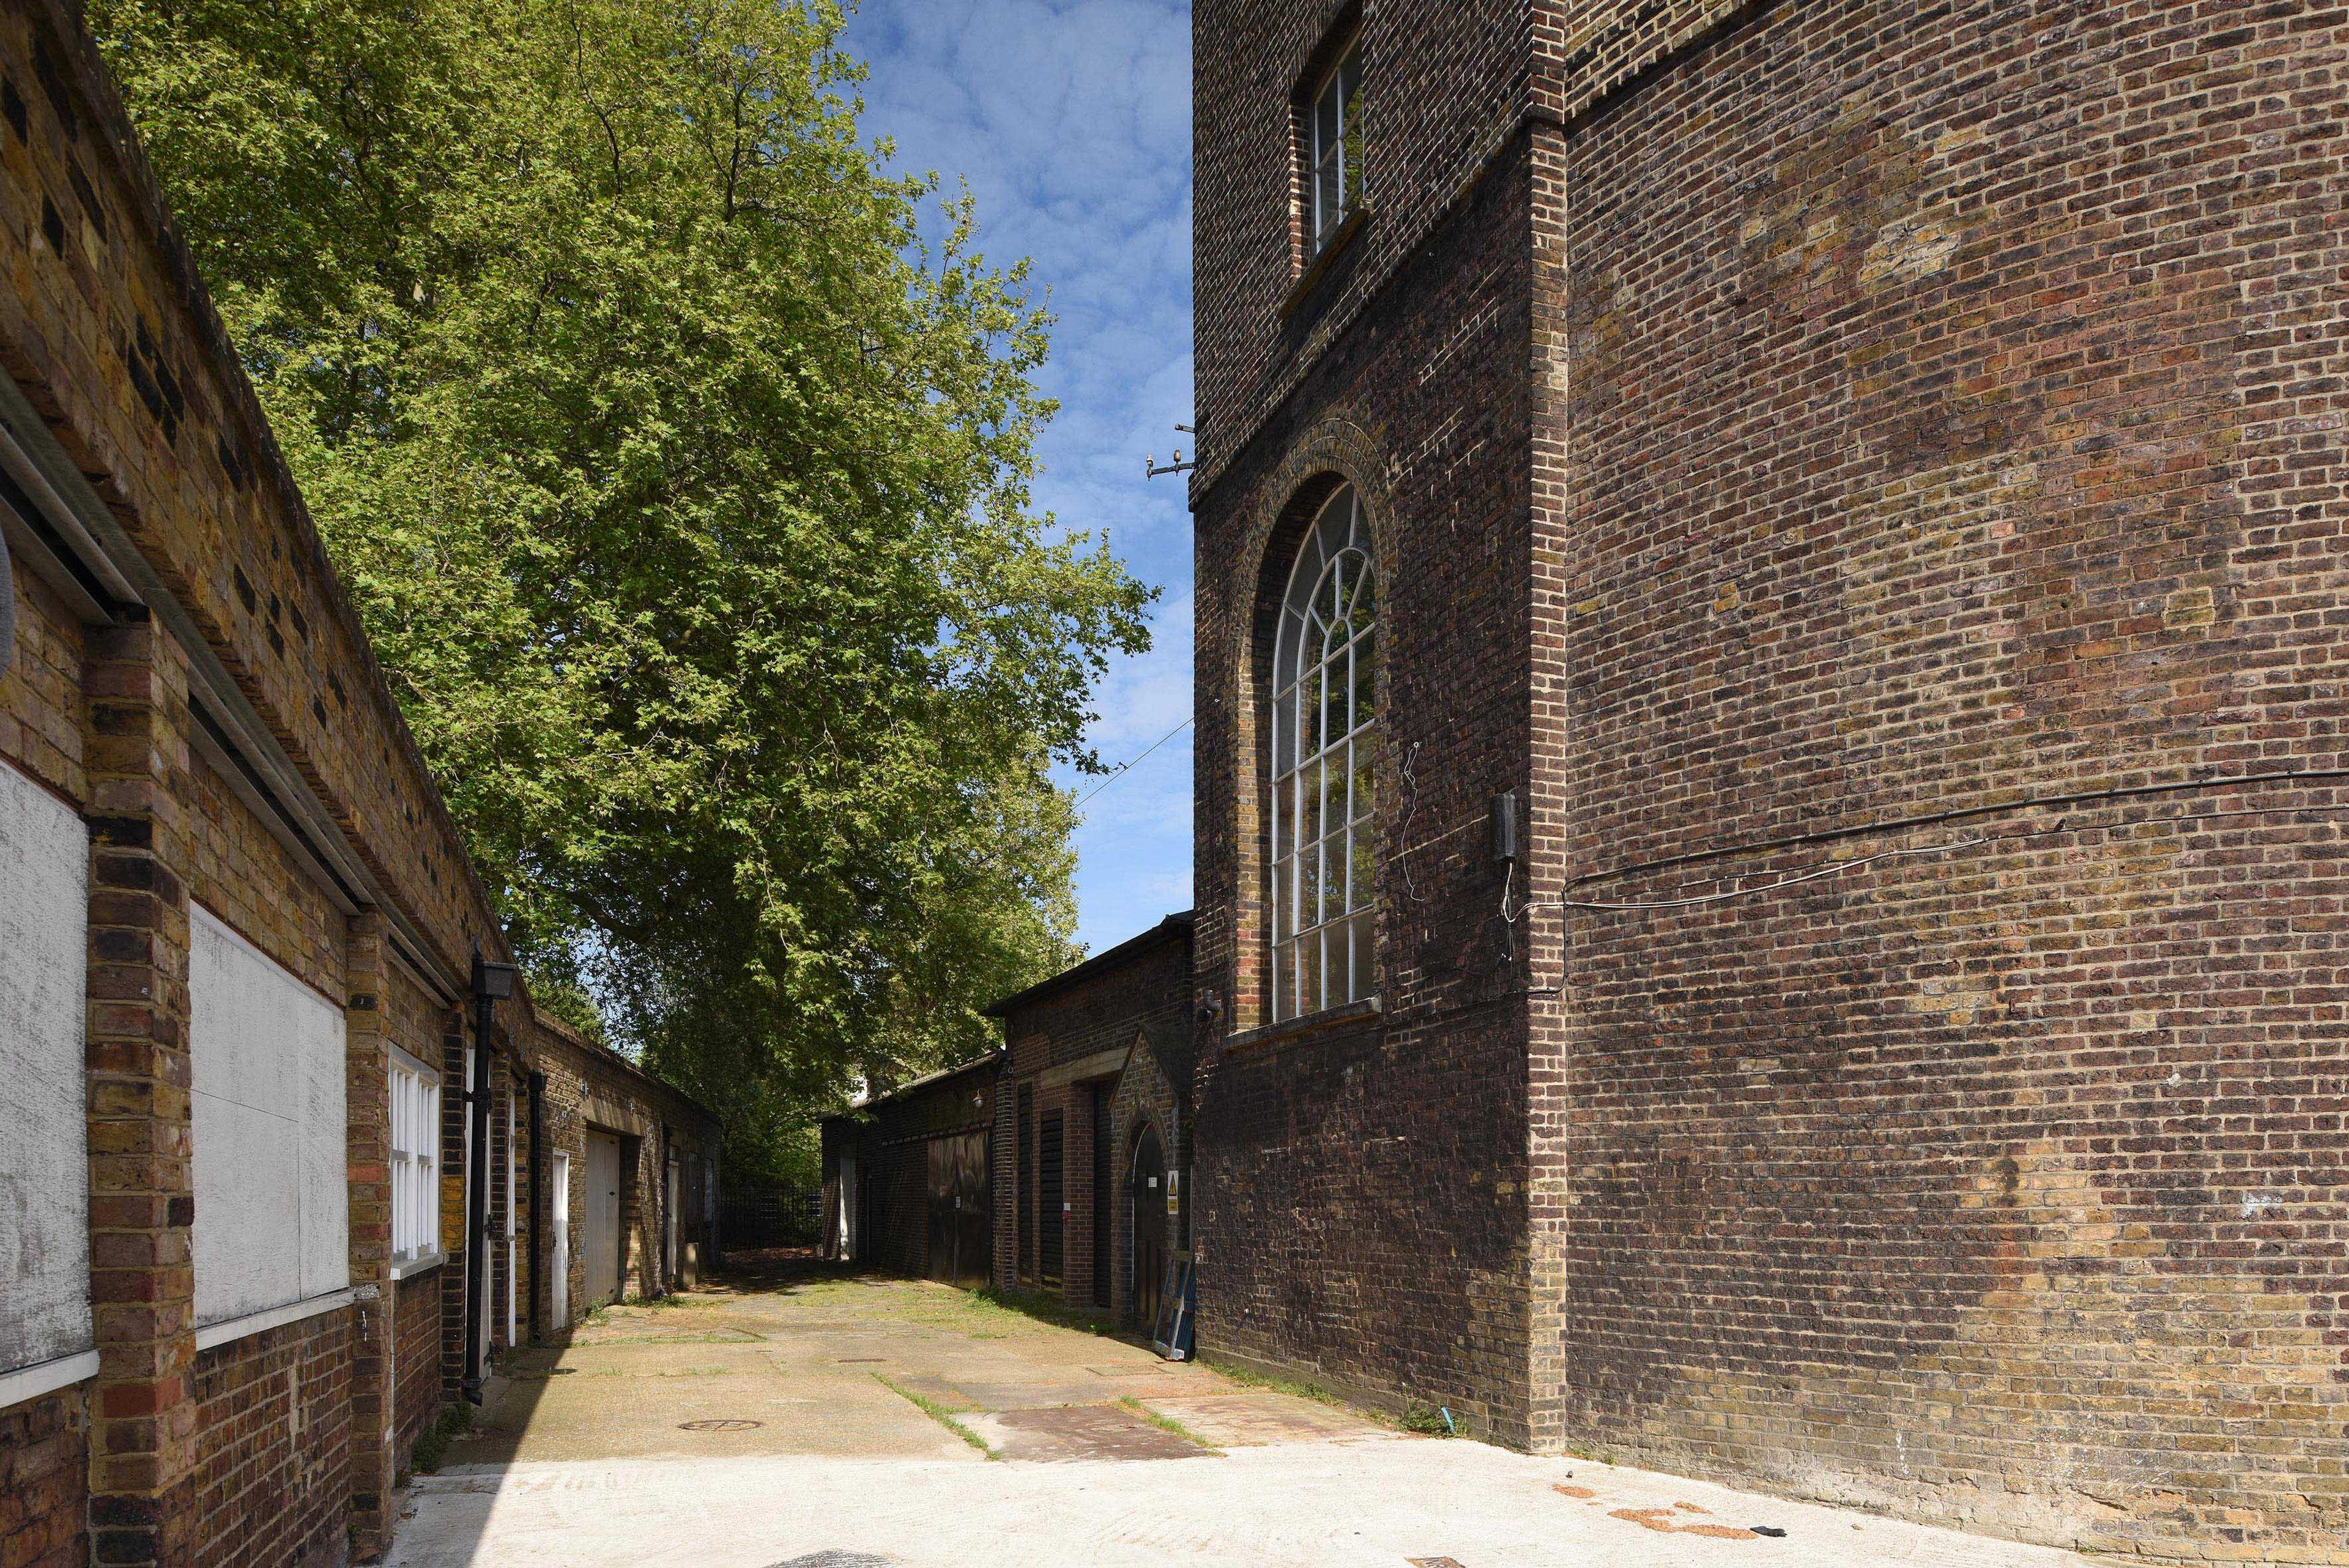 Photograph of a cobbled path with a tree at one end and two brick buildings either side. The sky is blue.